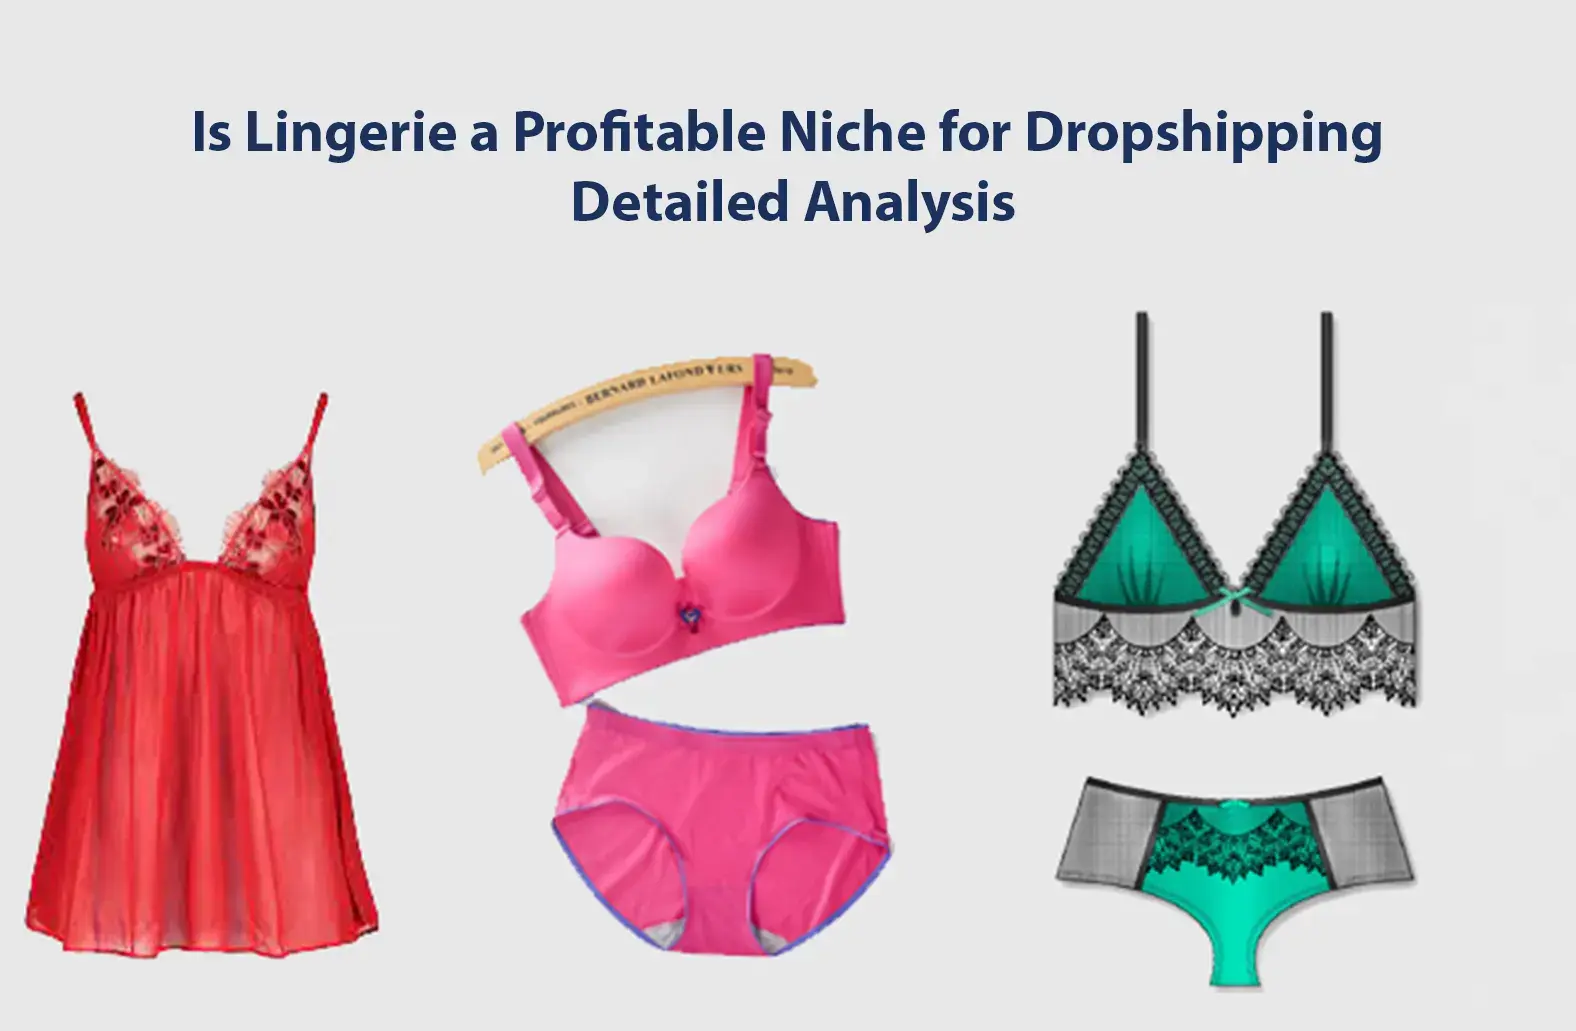 Is Lingerie a Profitable Niche for Dropshipping: Detailed Analysis